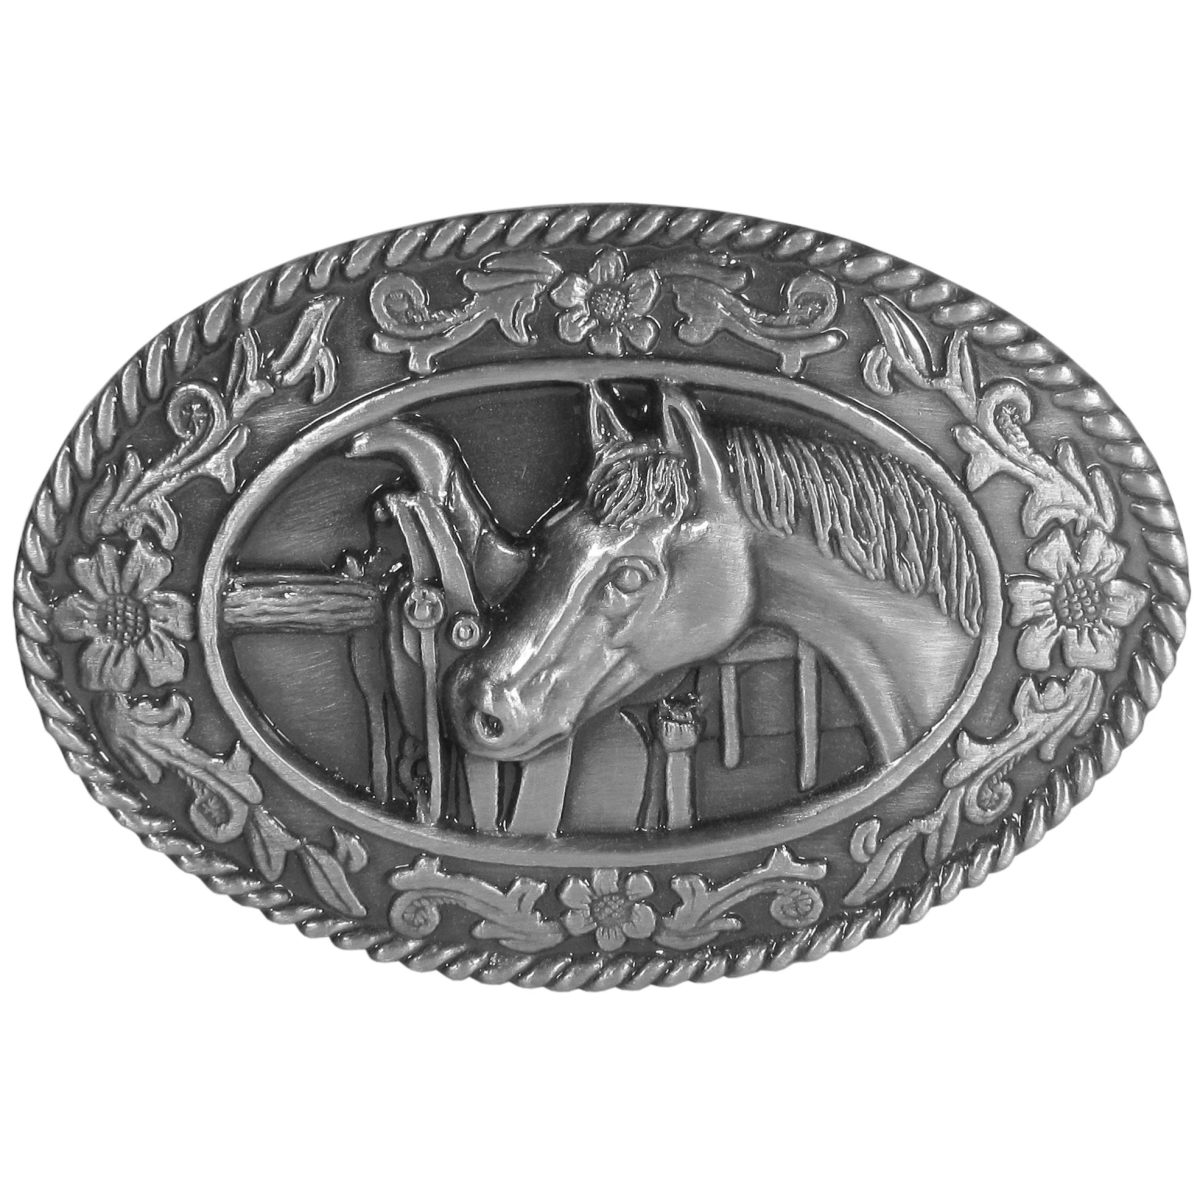 Picture of Siskiyou SW1 2 in. Horse head & Saddle Antiqued Belt Buckle